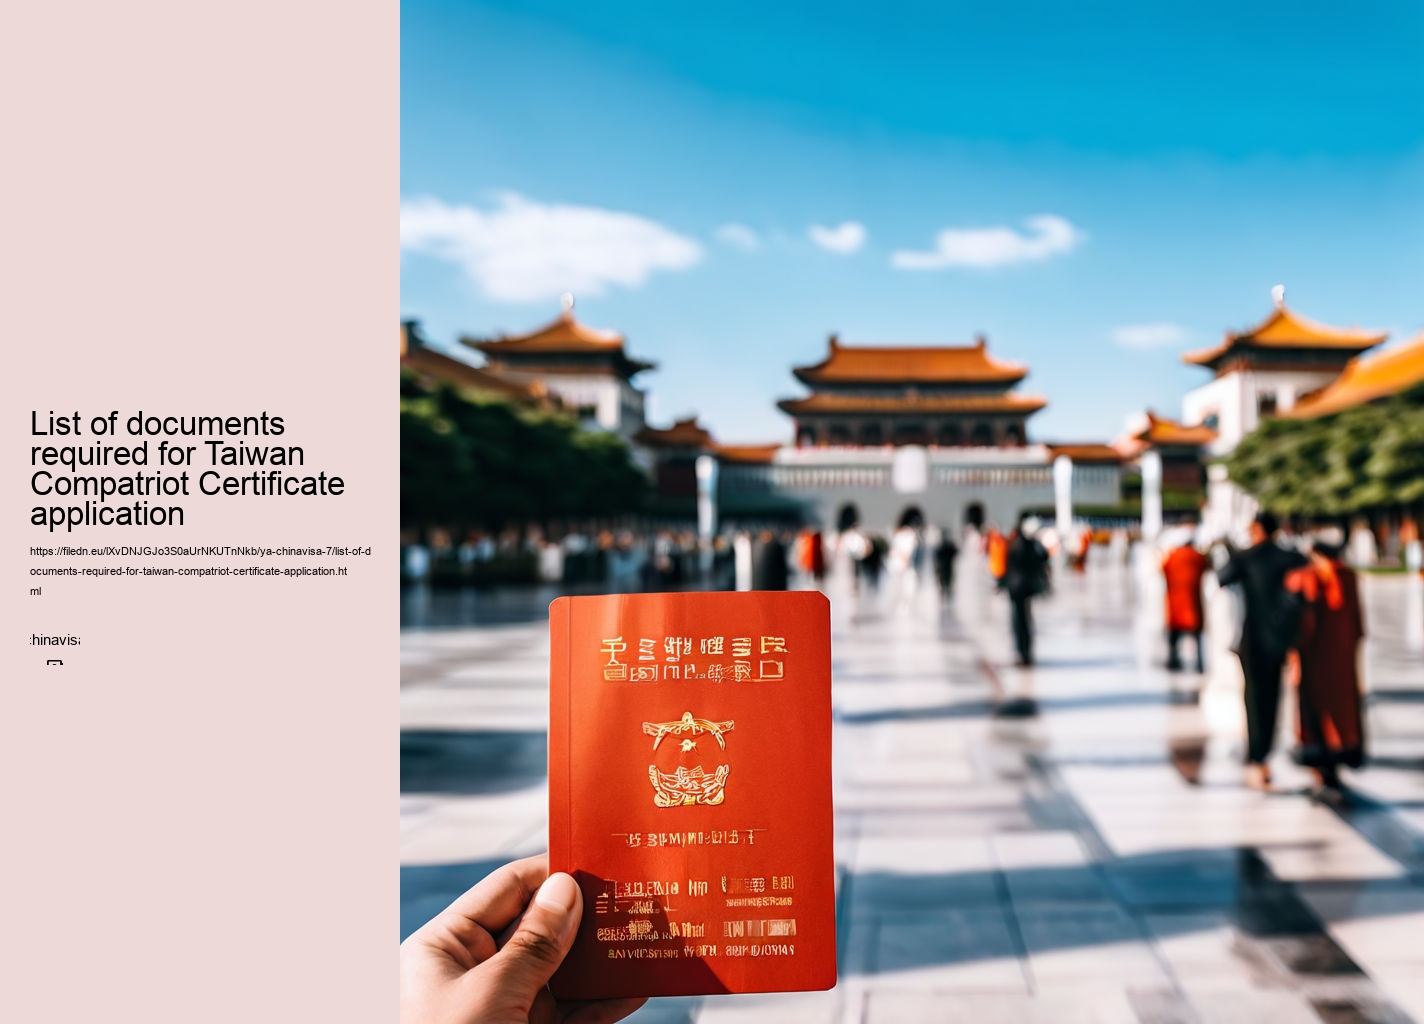 List of documents required for Taiwan Compatriot Certificate application